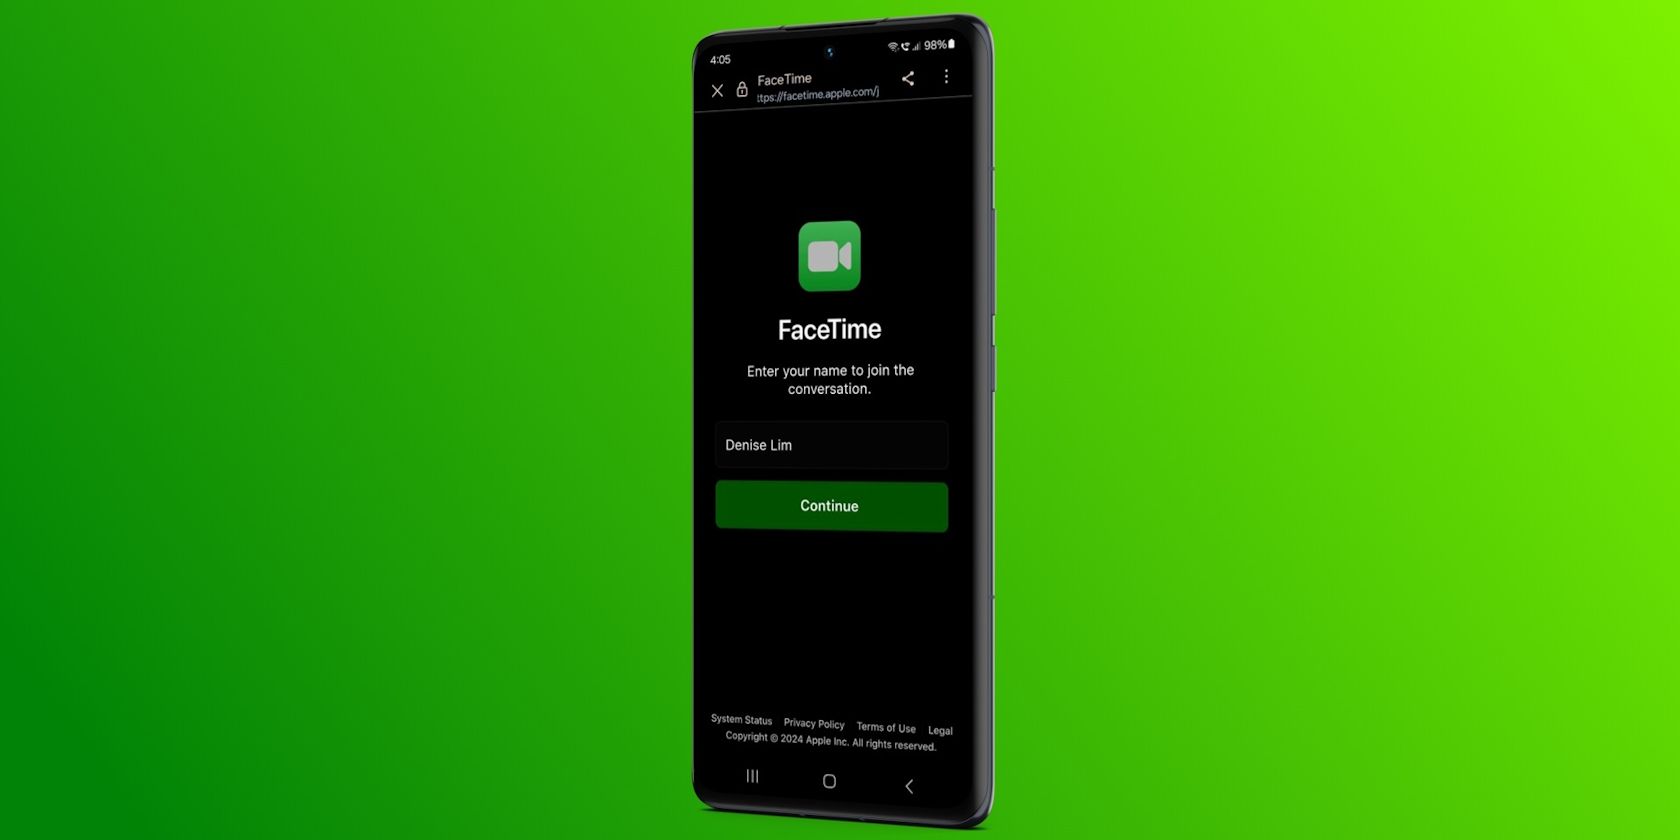 FaceTime joining screen on an Android phone